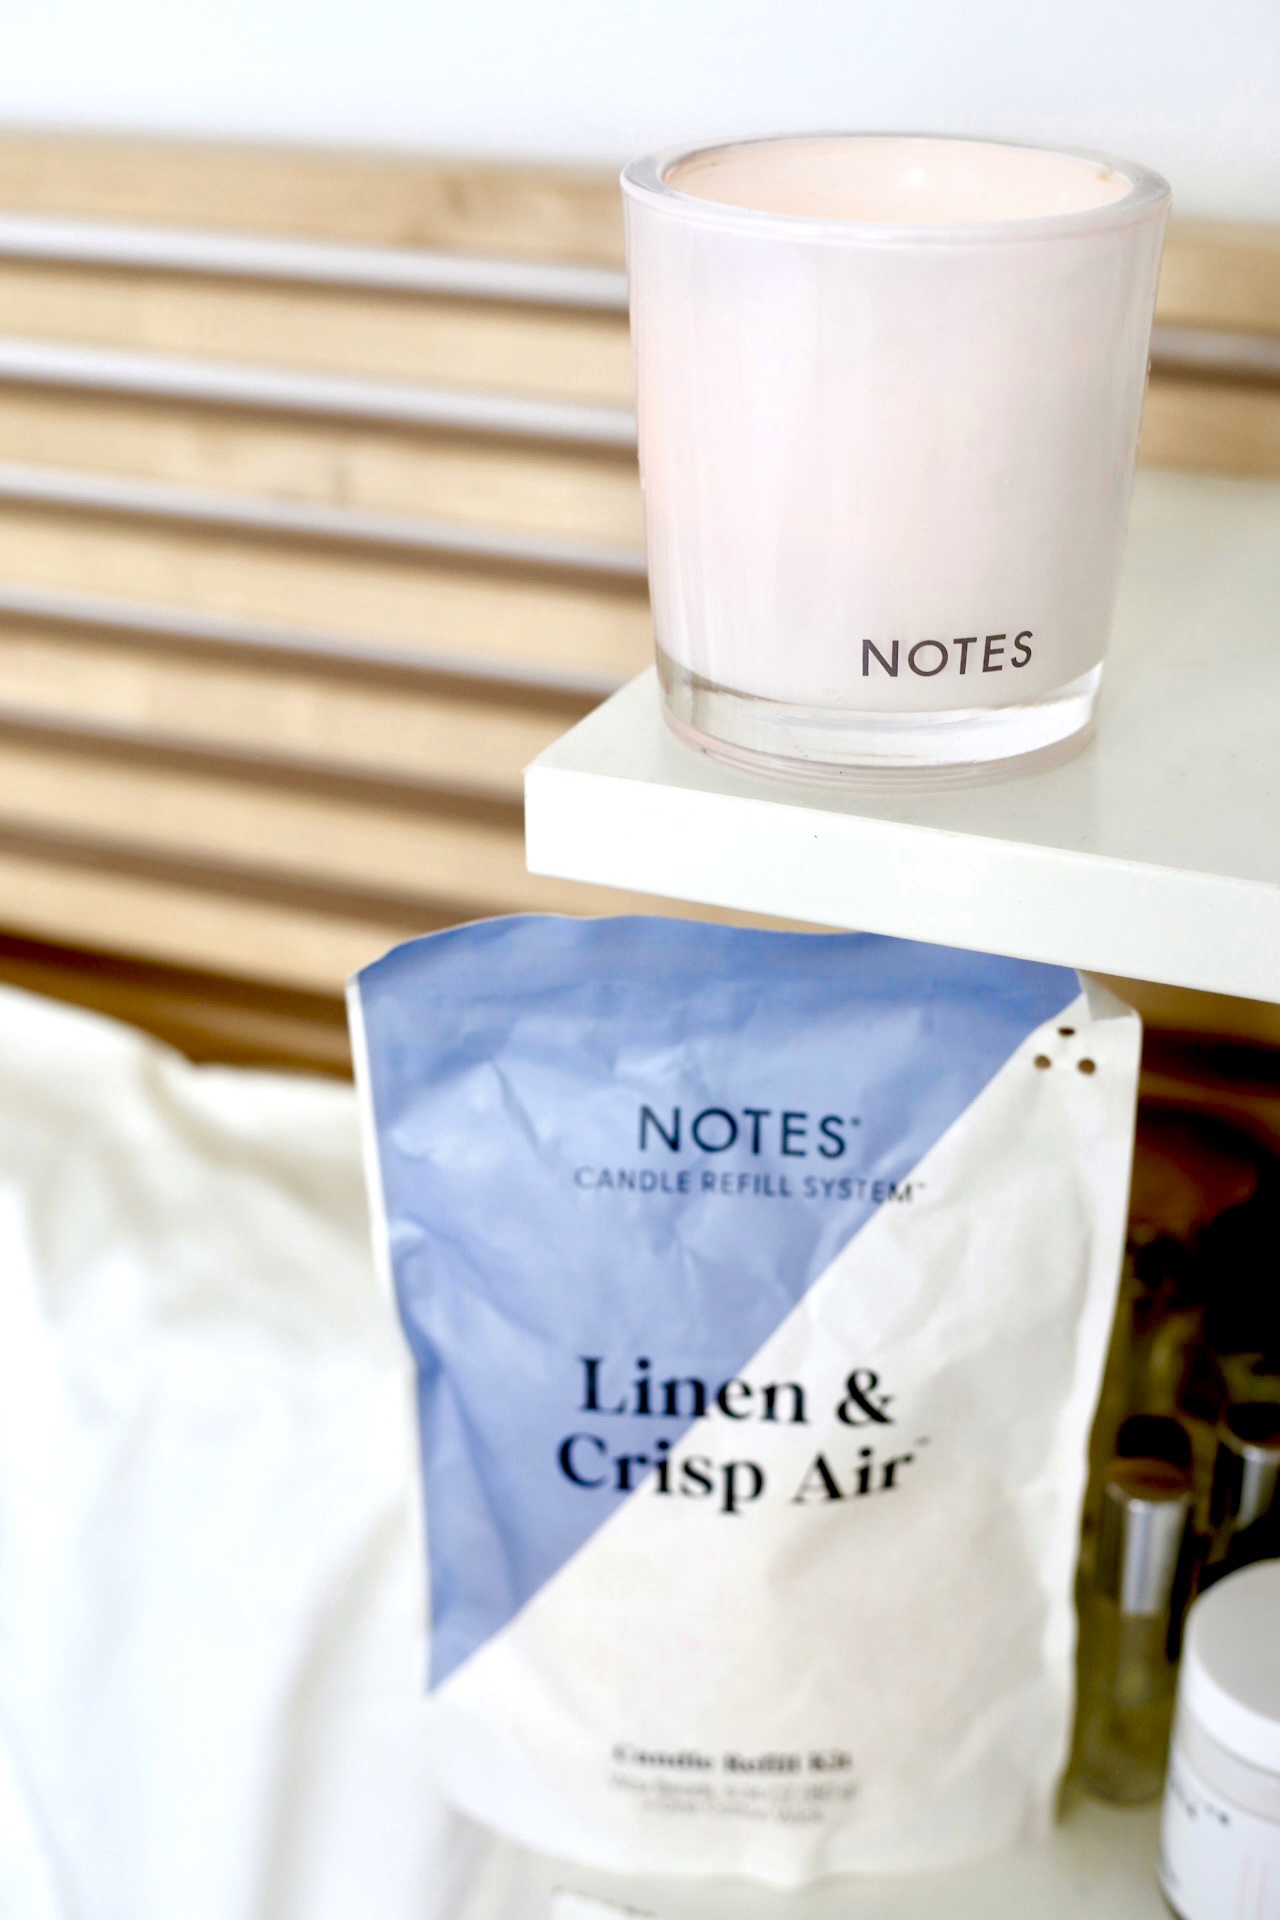 Notes candle